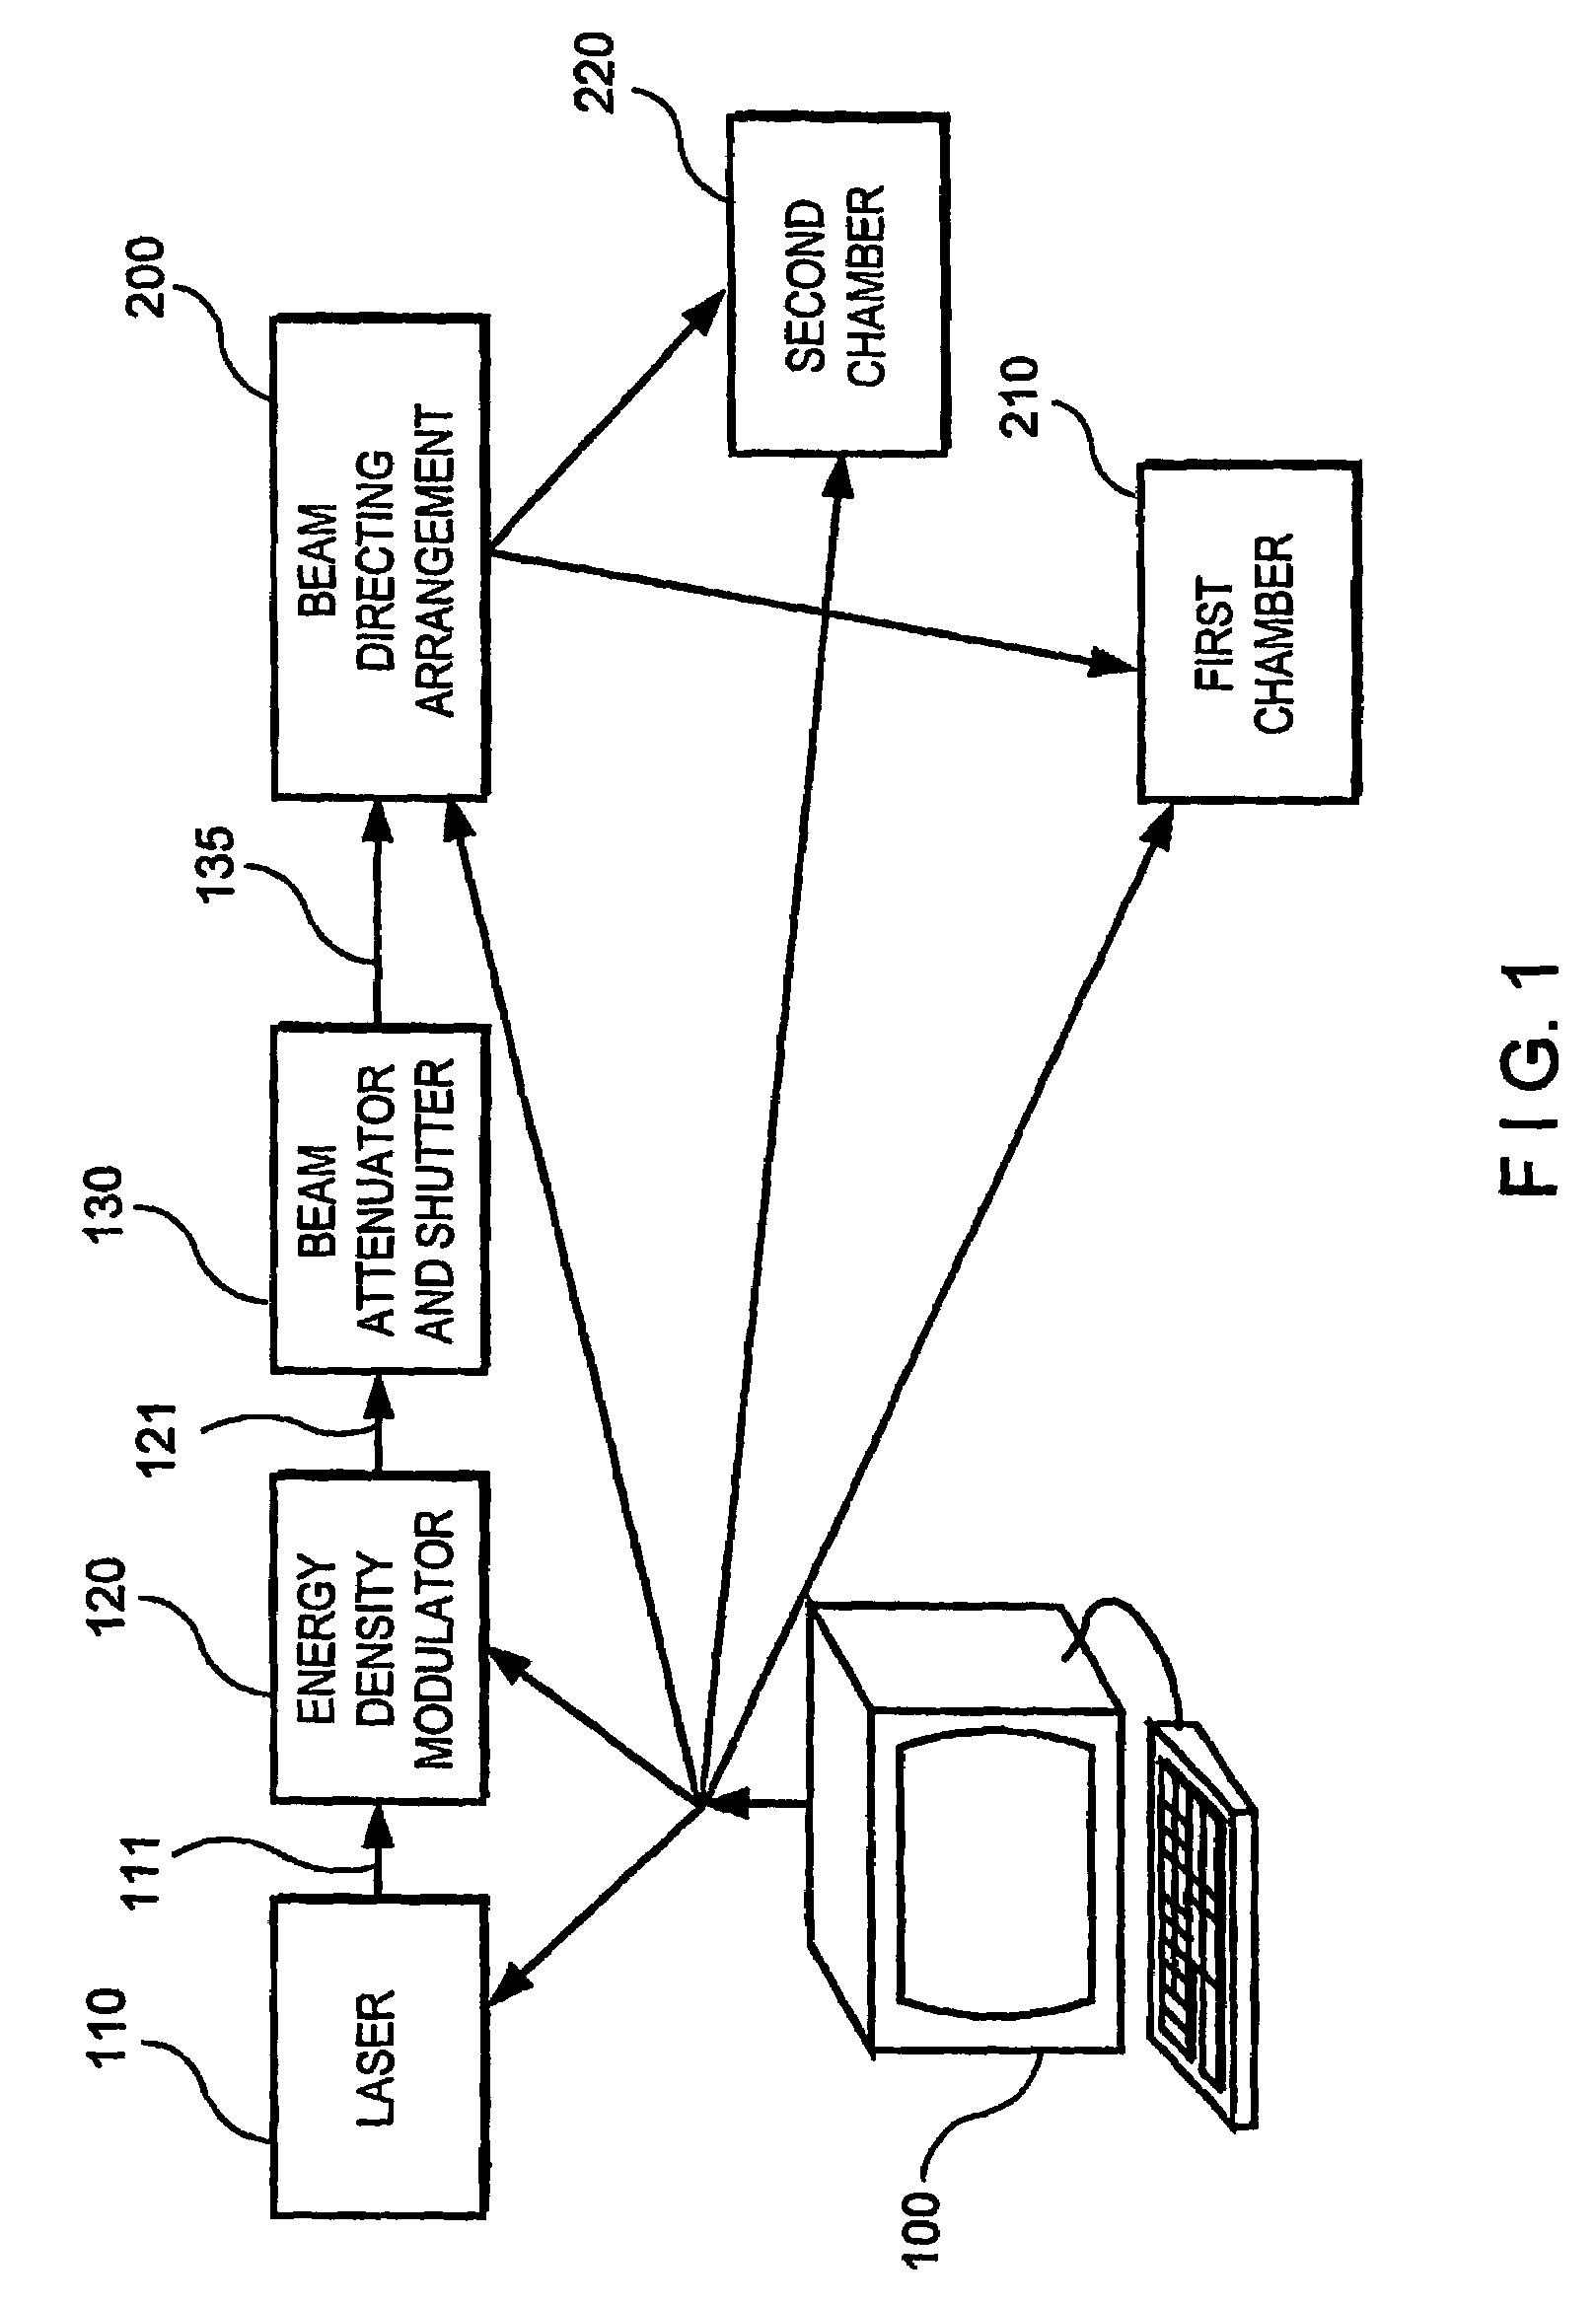 System and process for processing a plurality of semiconductor thin films which are crystallized using sequential lateral solidification techniques